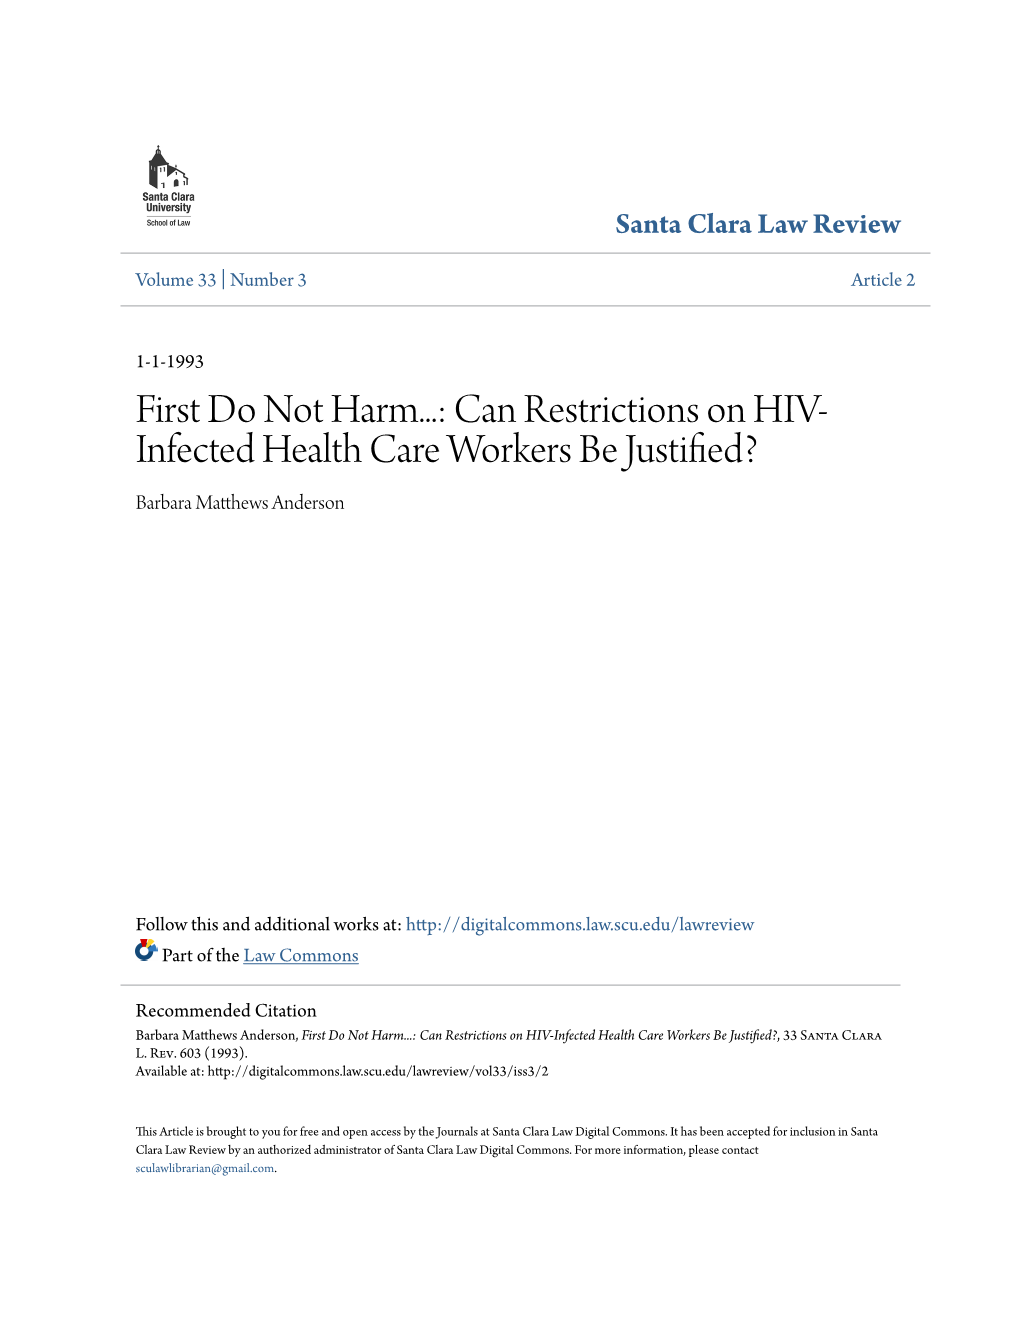 Can Restrictions on HIV-Infected Health Care Workers Be Justified?, 33 Santa Clara L